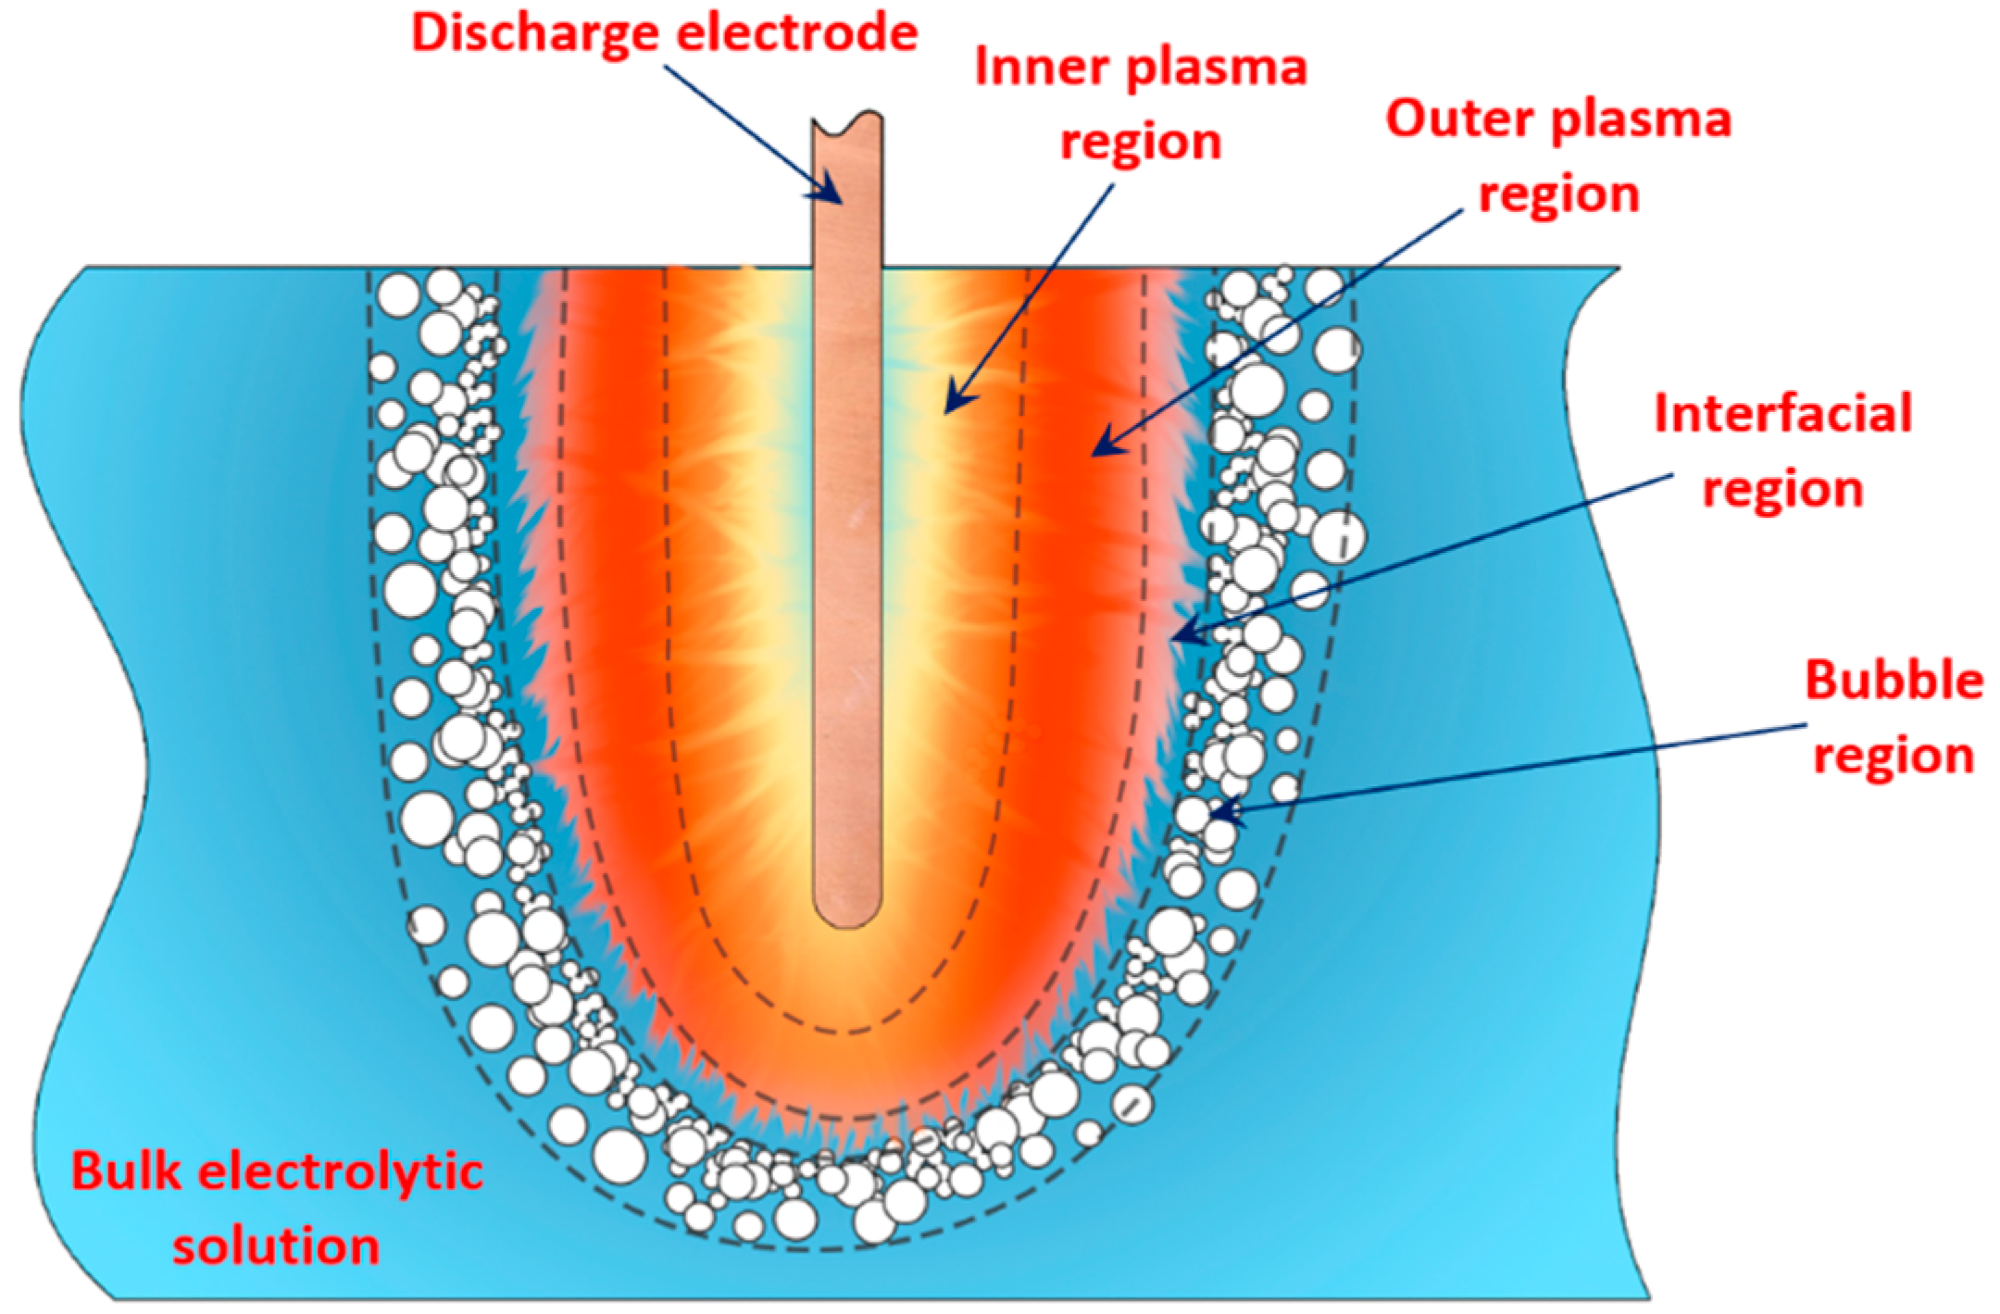 Illustration of the regions at the discharge electrode.